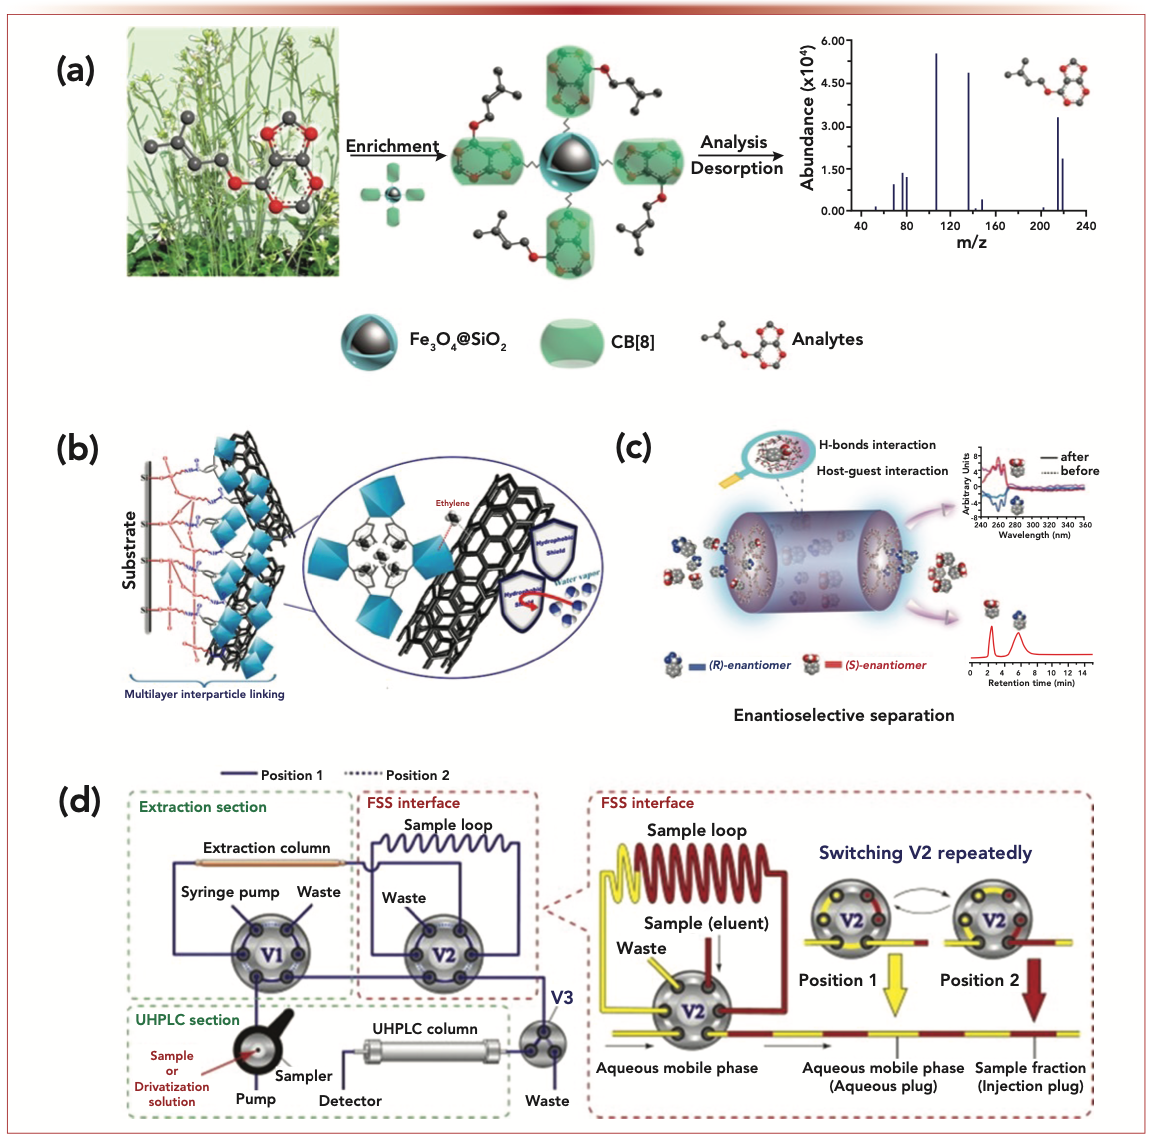 FIGURE 1: (a) Efficient and selective enrichment of ultratrace cytokinins in plant samples by magnetic perhydroxy-cucurbit[8]uril microspheres (2). (b) Multilayer interparticle linking a hybrid metal-organic framework (MOF-199) for noninvasive enrichment and analysis of the plant hormone ethylene (5). (c) β-cyclodextrin porous polymers with three-dimensional chiral channels for separation of polar racemates (9). (d) A novel fractionized sampling and stacking strategy for online hyphenation of solid-phase extraction to ultrahigh-pressure liquid chromatography for ultrasensitive analysis (12).